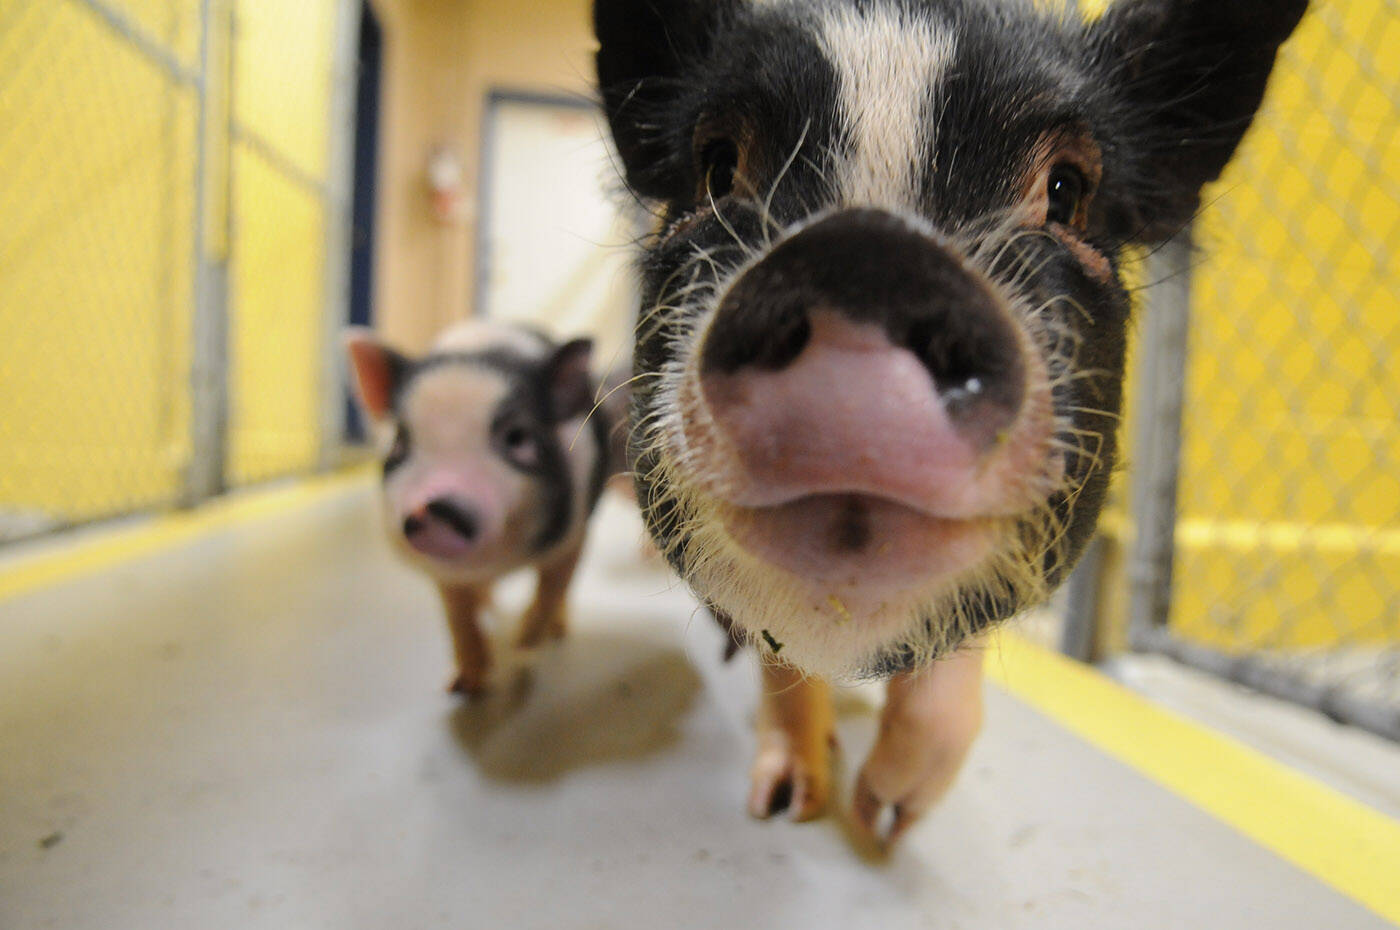 A mother miniature pot-bellied pig and her female piglet are seen at the Chilliwack SPCA on Thursday, Dec. 23, 2021. Tuesday, March 1, 2022 is Pig Day. (Jenna Hauck/ Chilliwack Progress file)